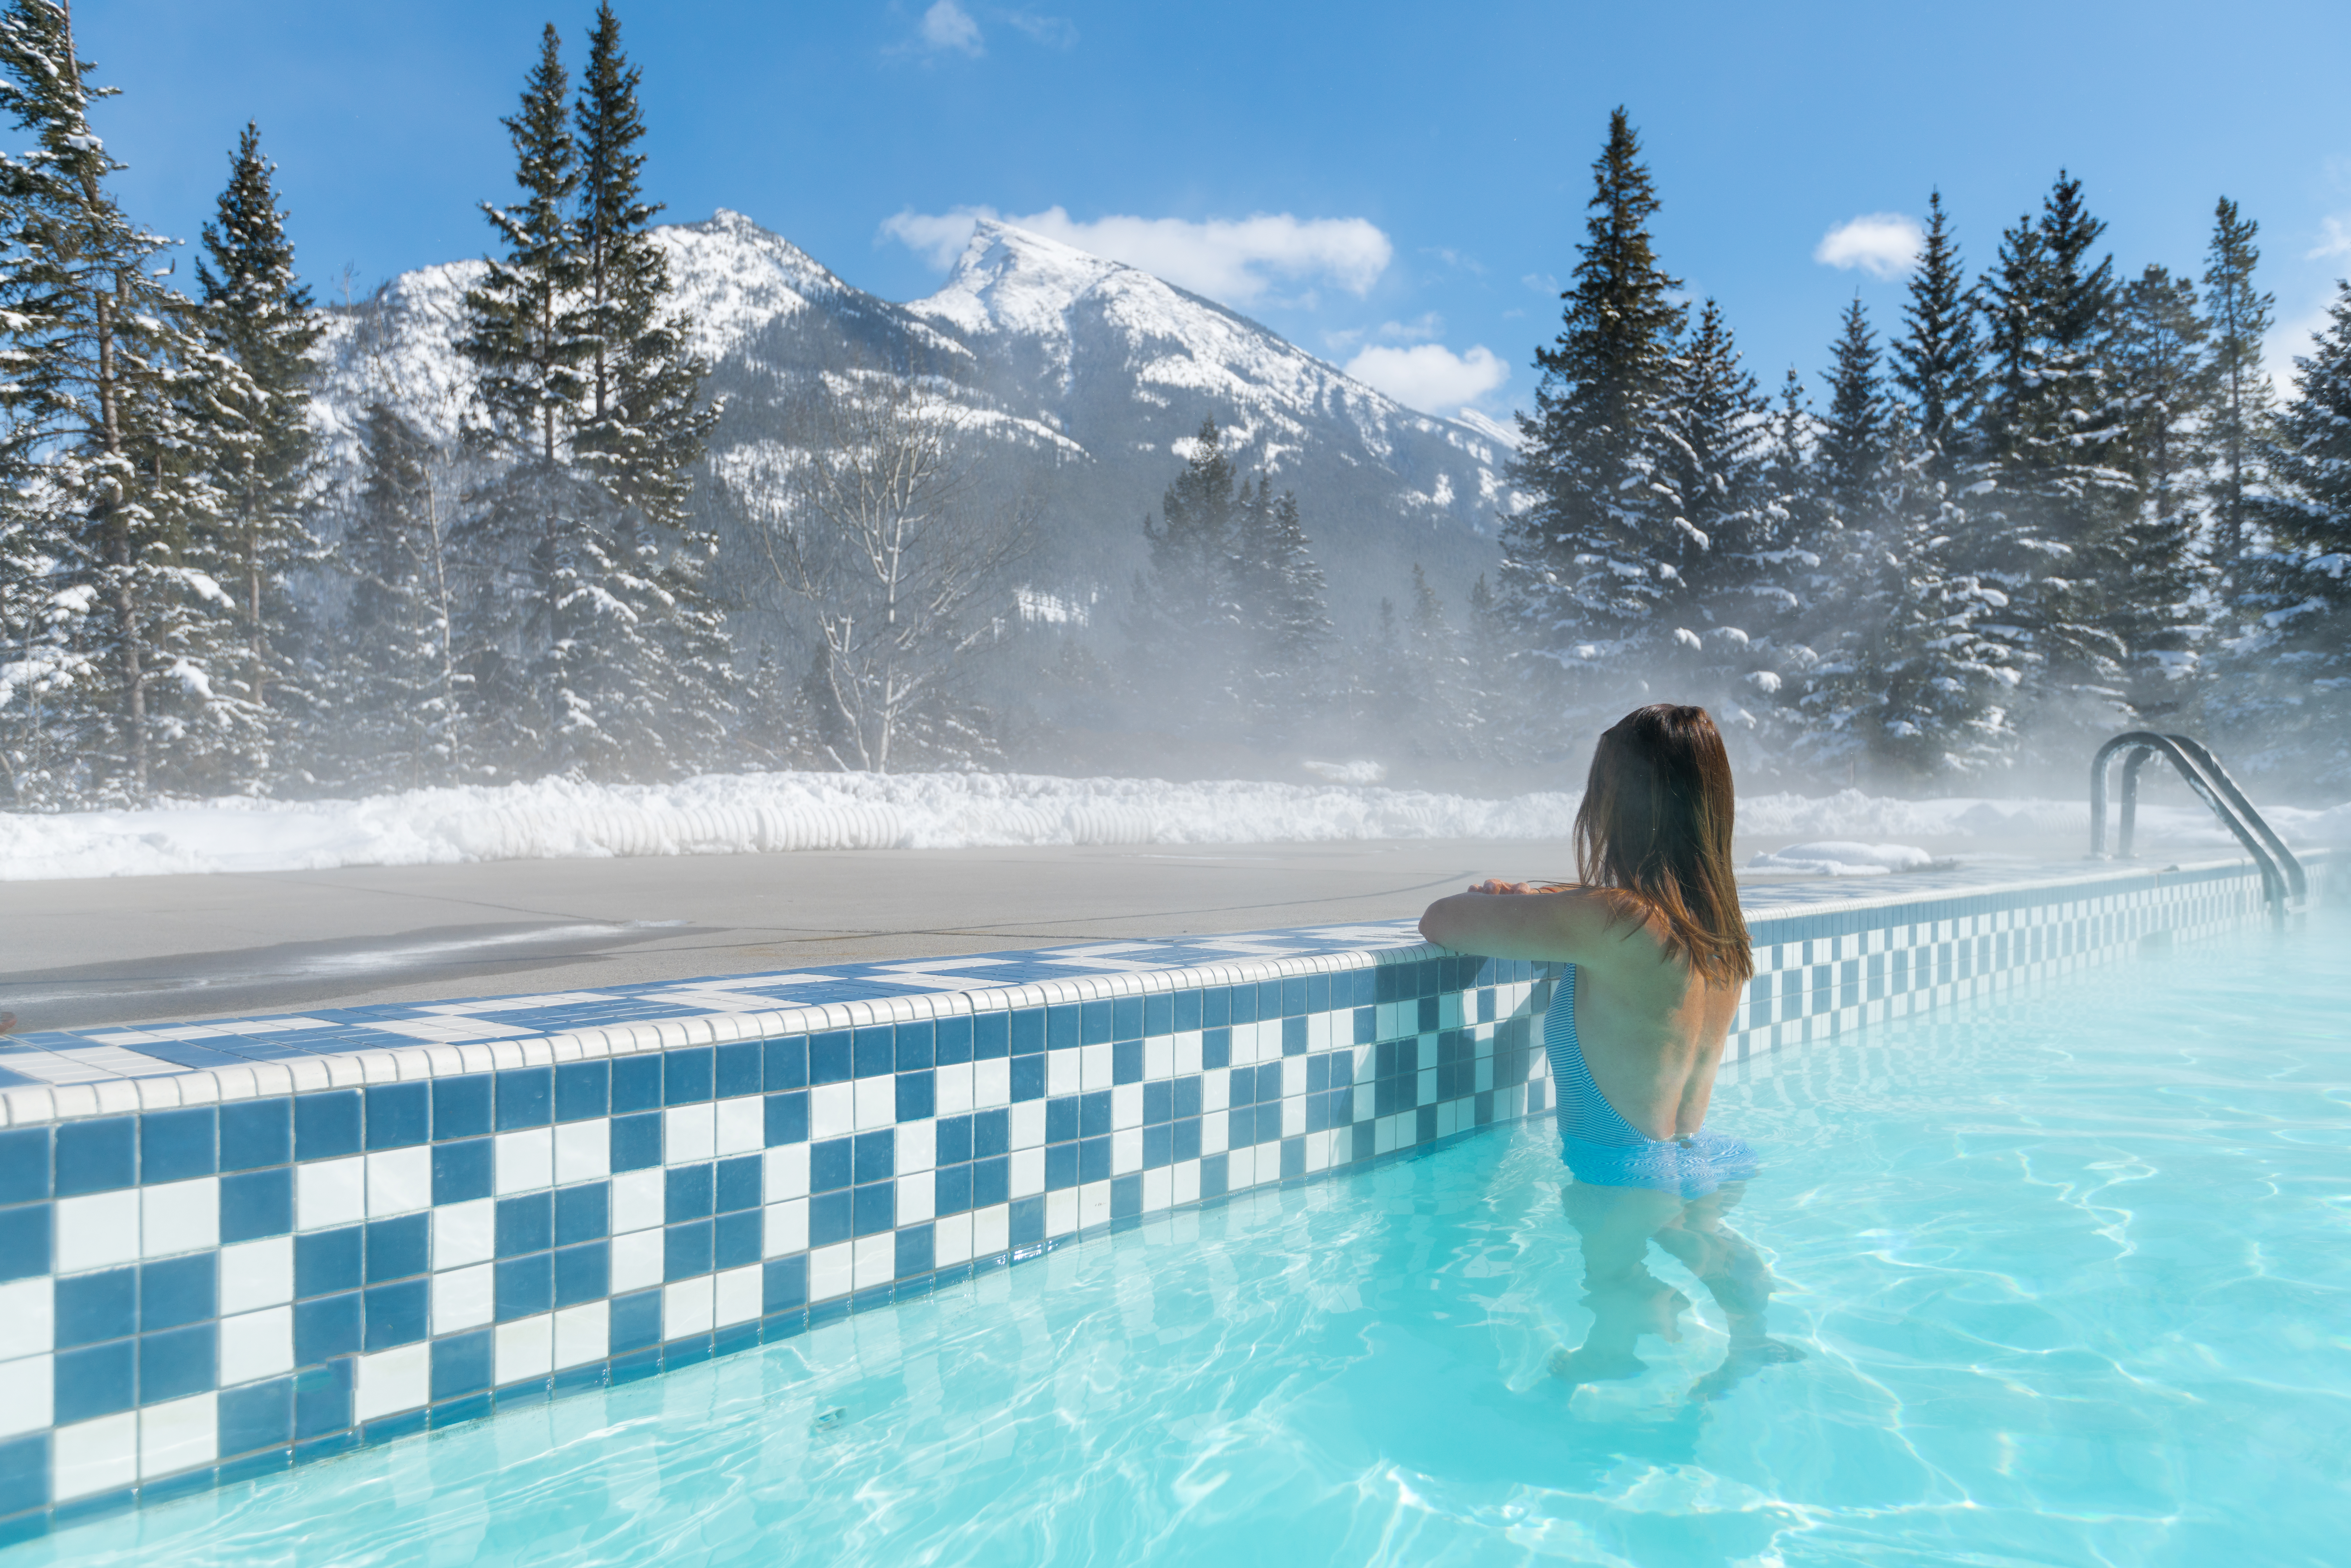 Enjoying the views in the outdoor hot tub. The Fairmont Banff Springs.